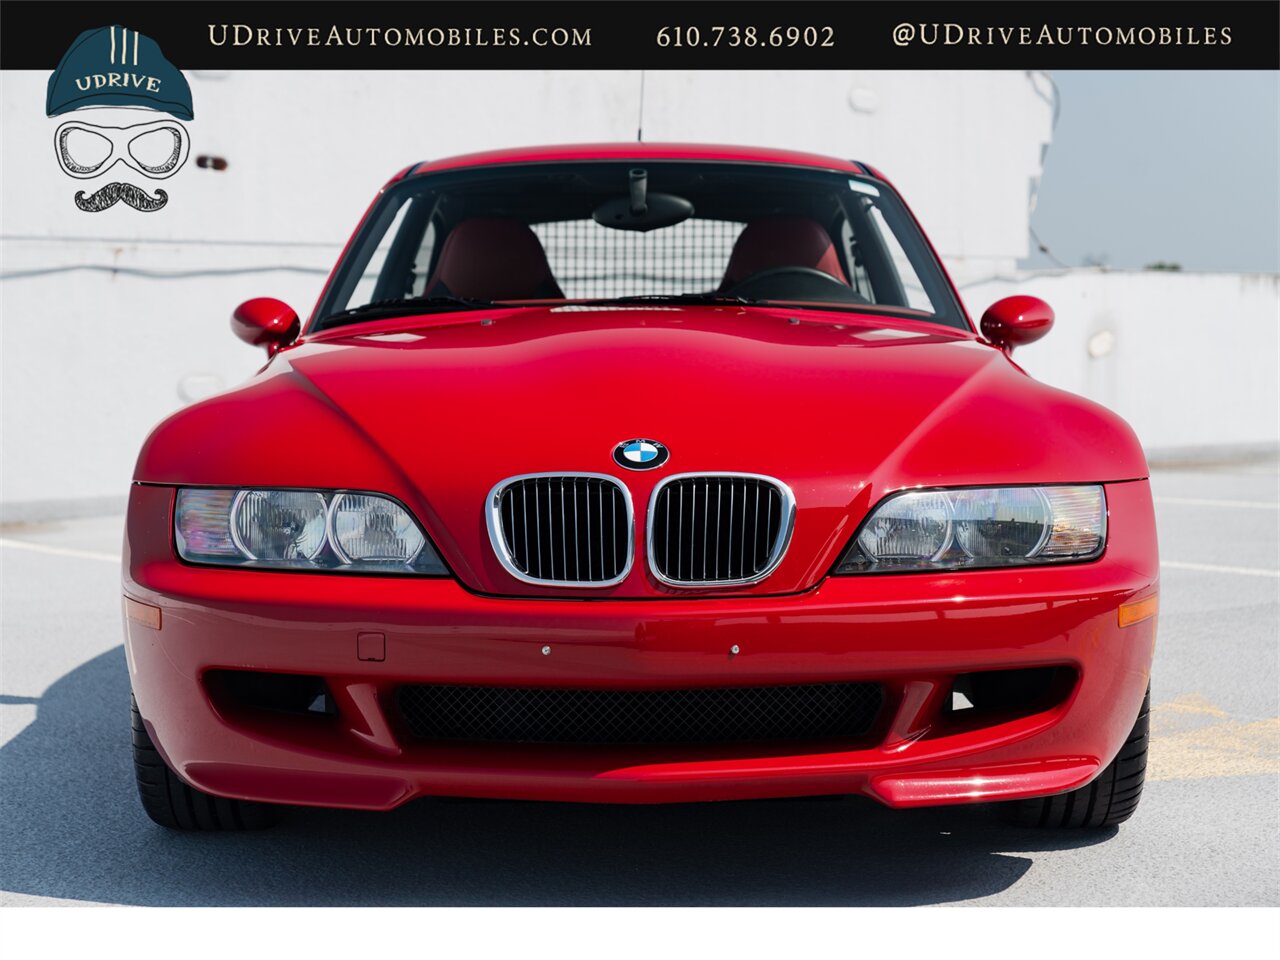 2000 BMW Z3 M  Coupe 25k Miles  Sunroof Delete $4k Recent Service - Photo 13 - West Chester, PA 19382